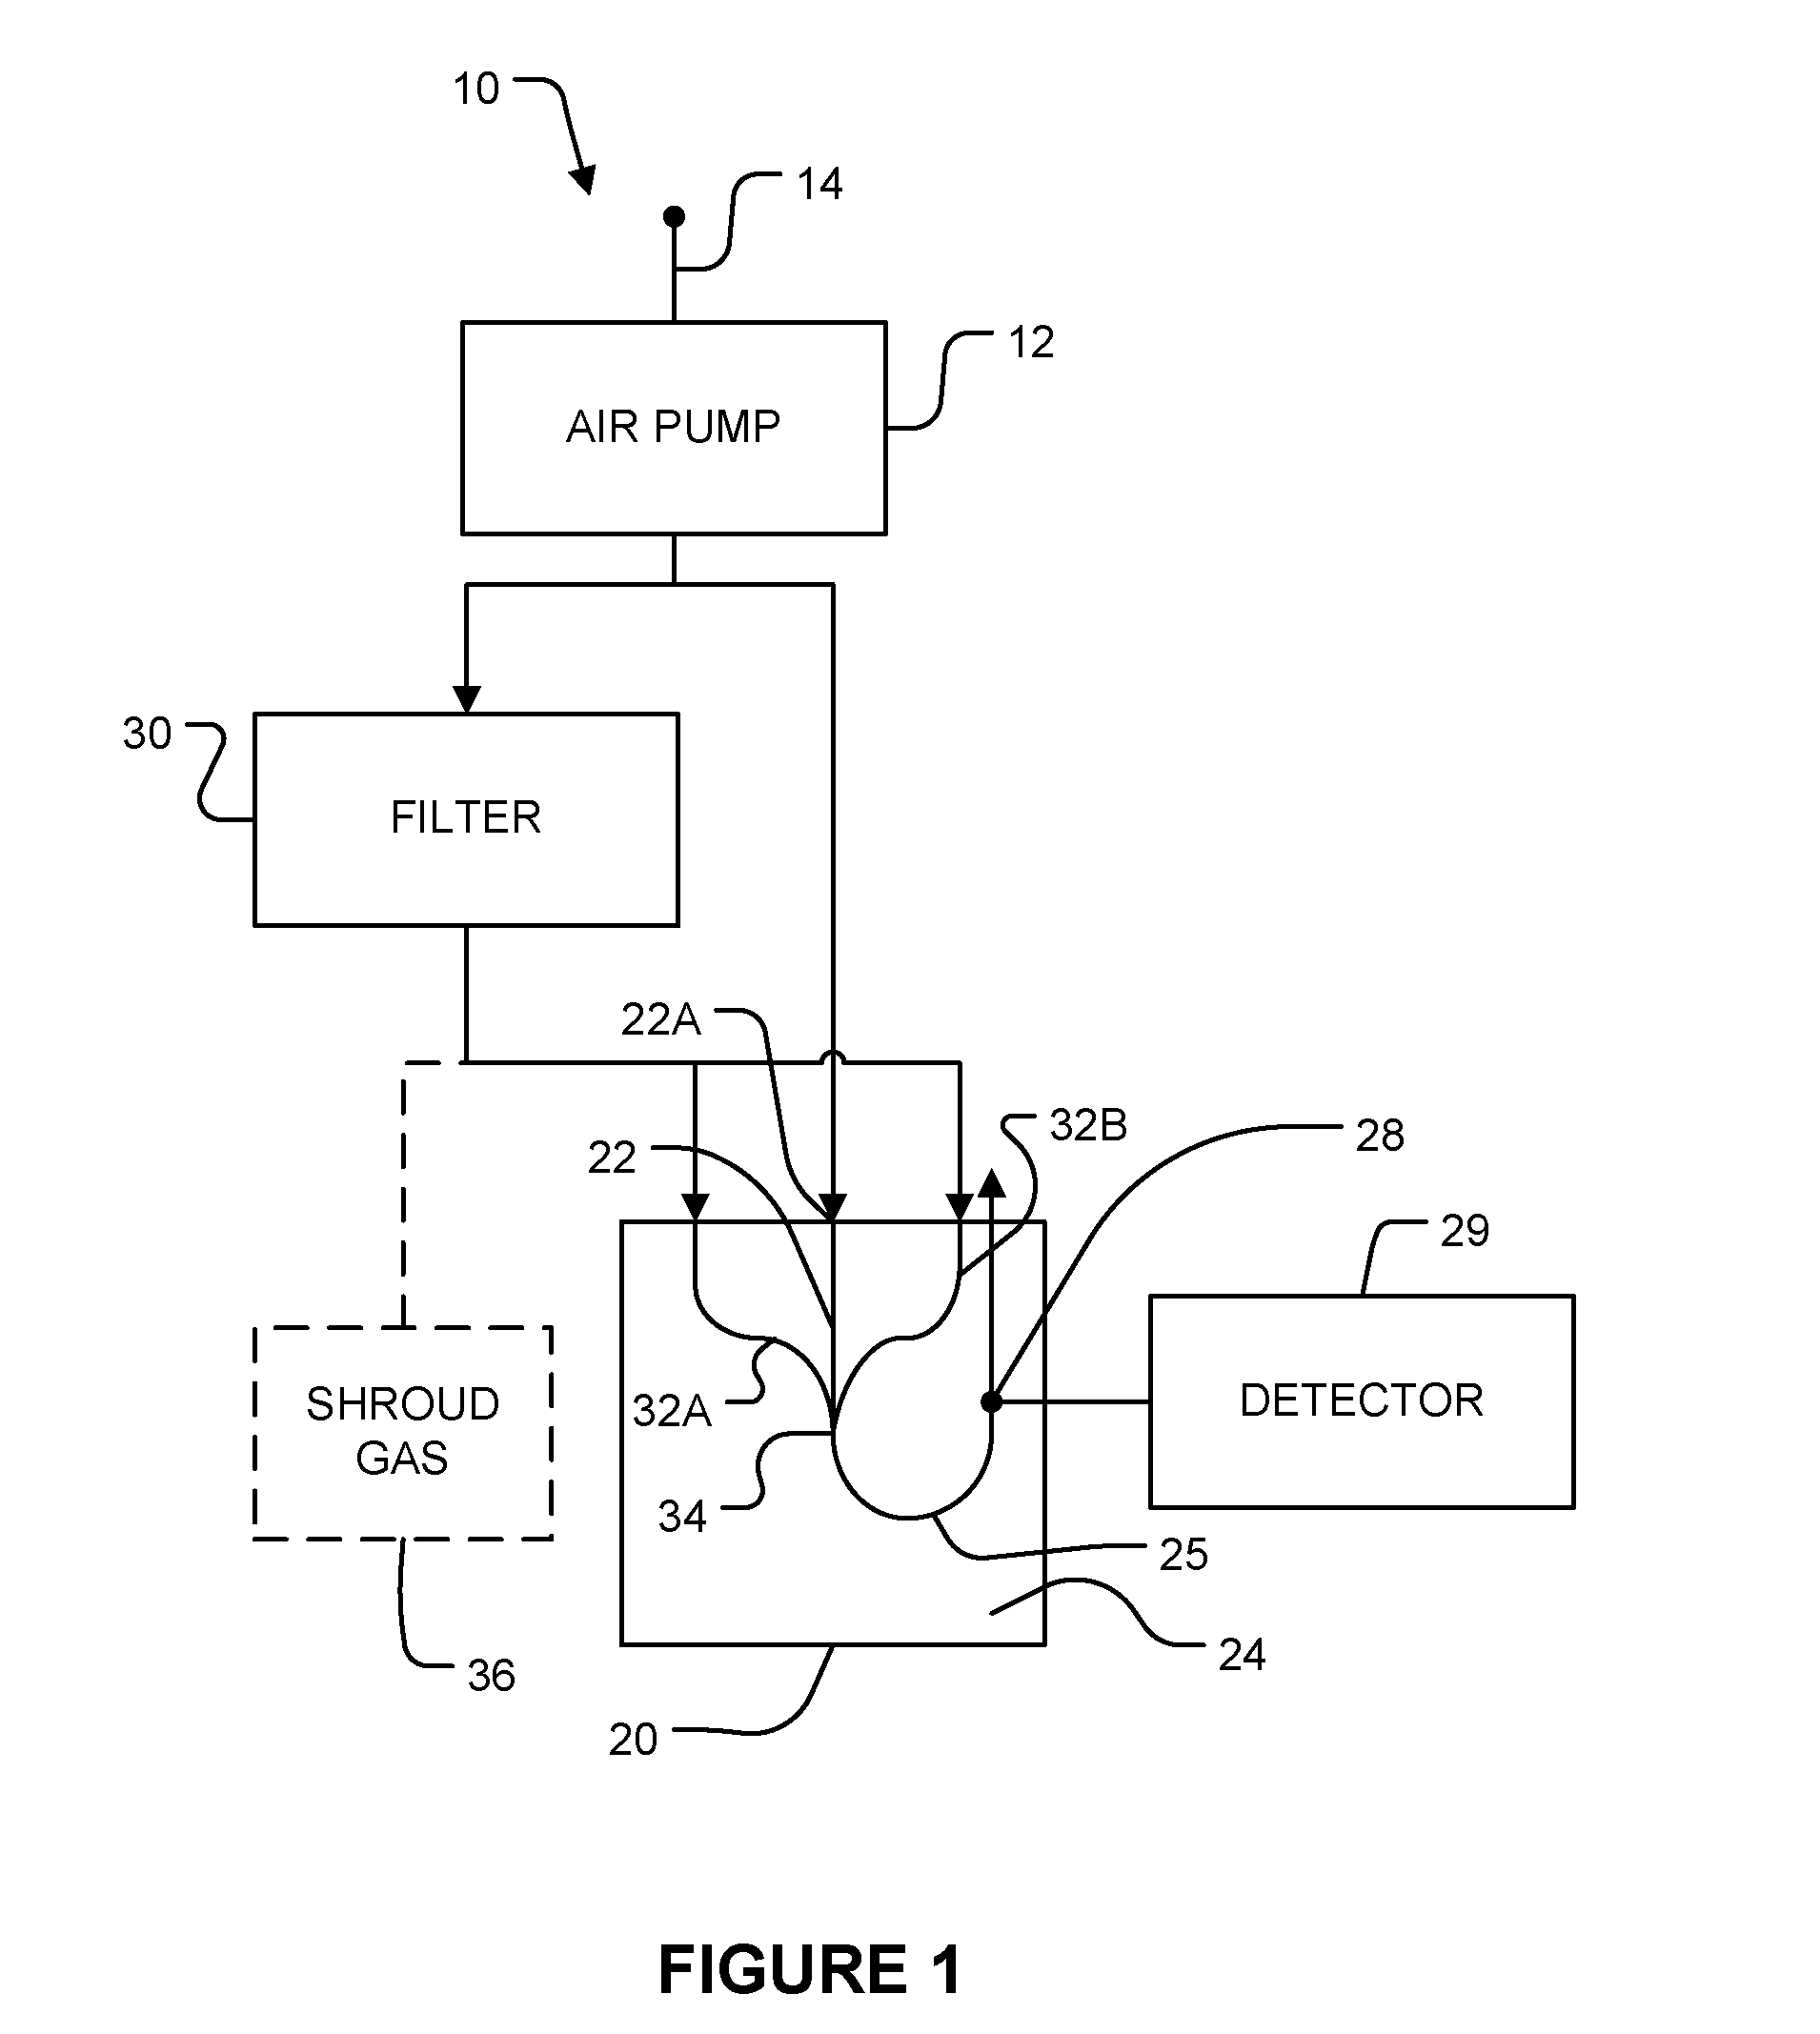 Methods and apparatus for detecting particles entrained in fluids